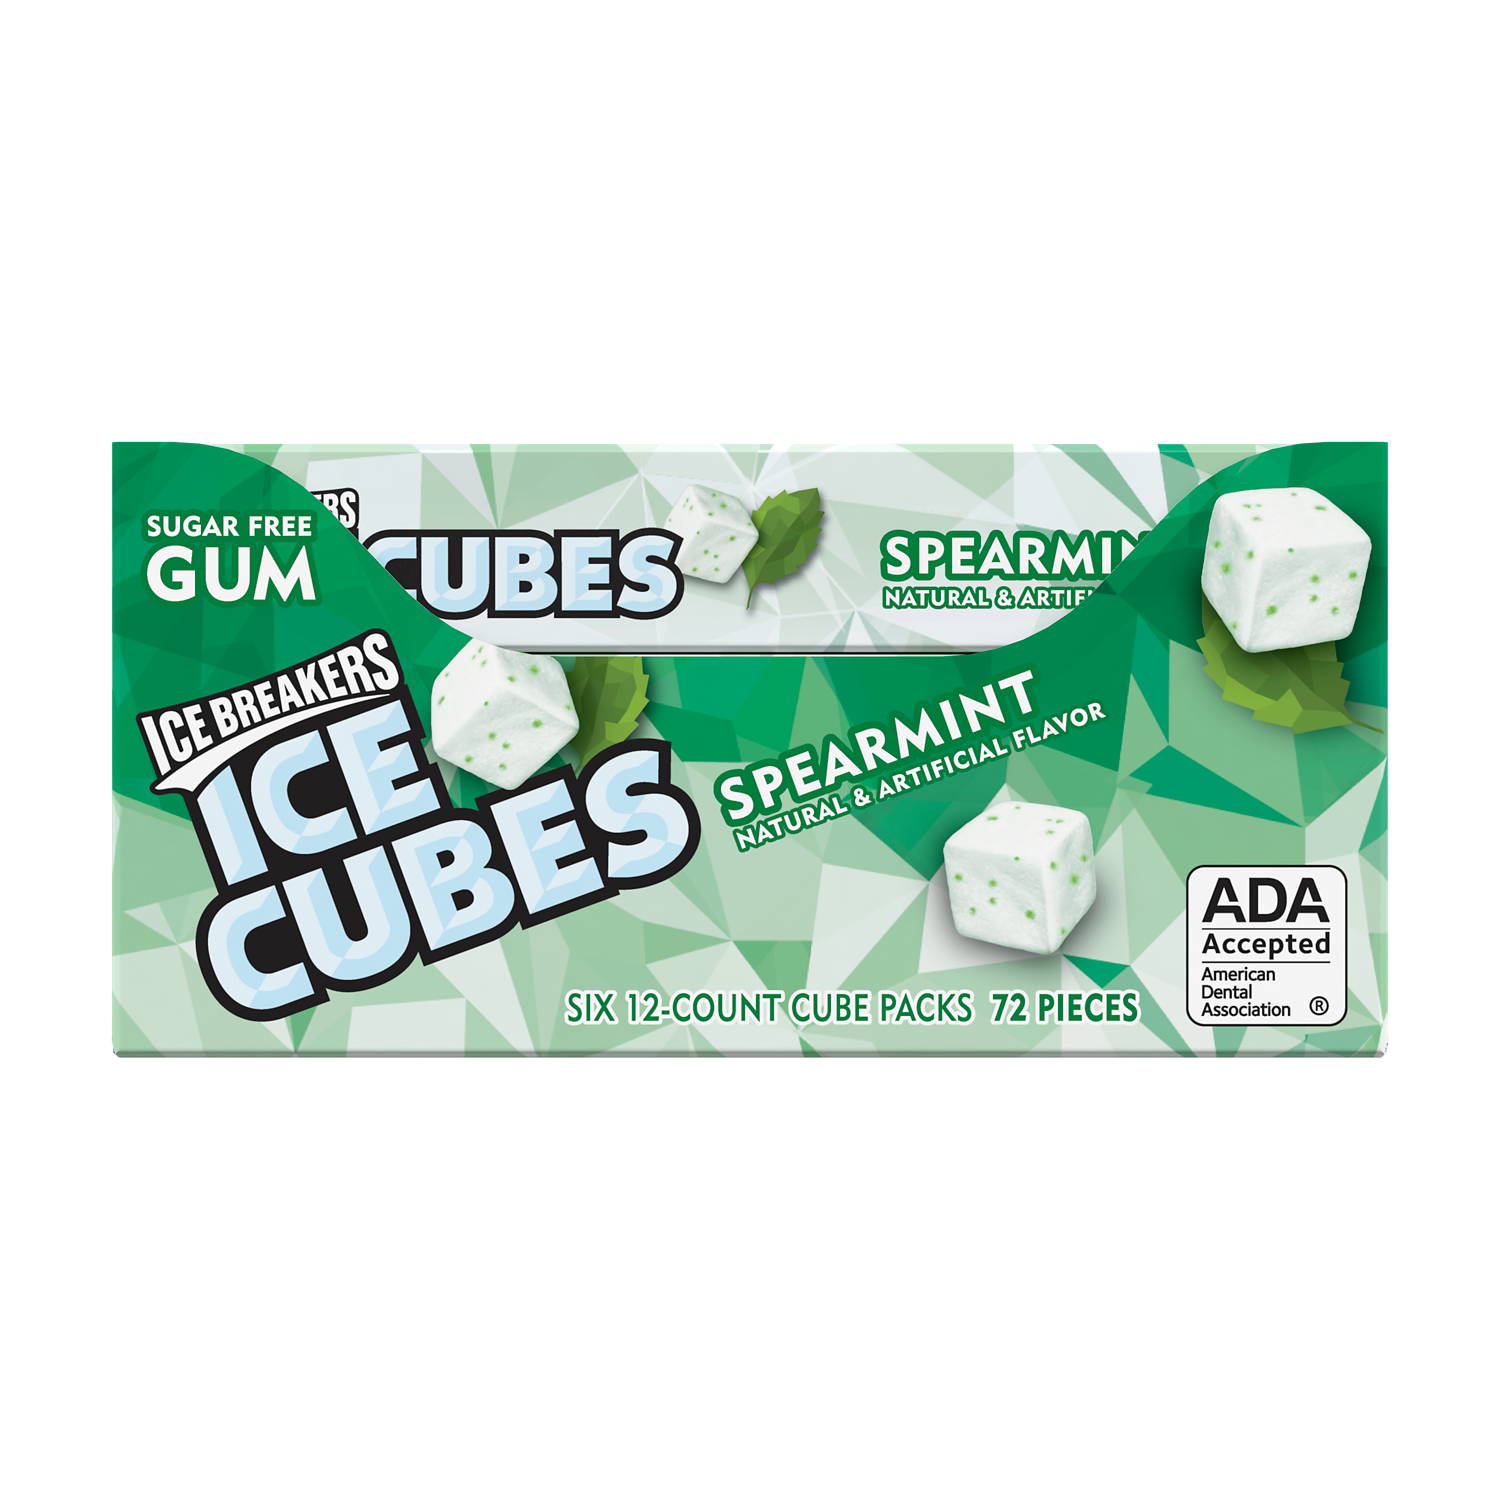 ICE BREAKERS ICE CUBES Spearmint Sugar Free Gum, 0.976 oz box, 12 count - Front of Package